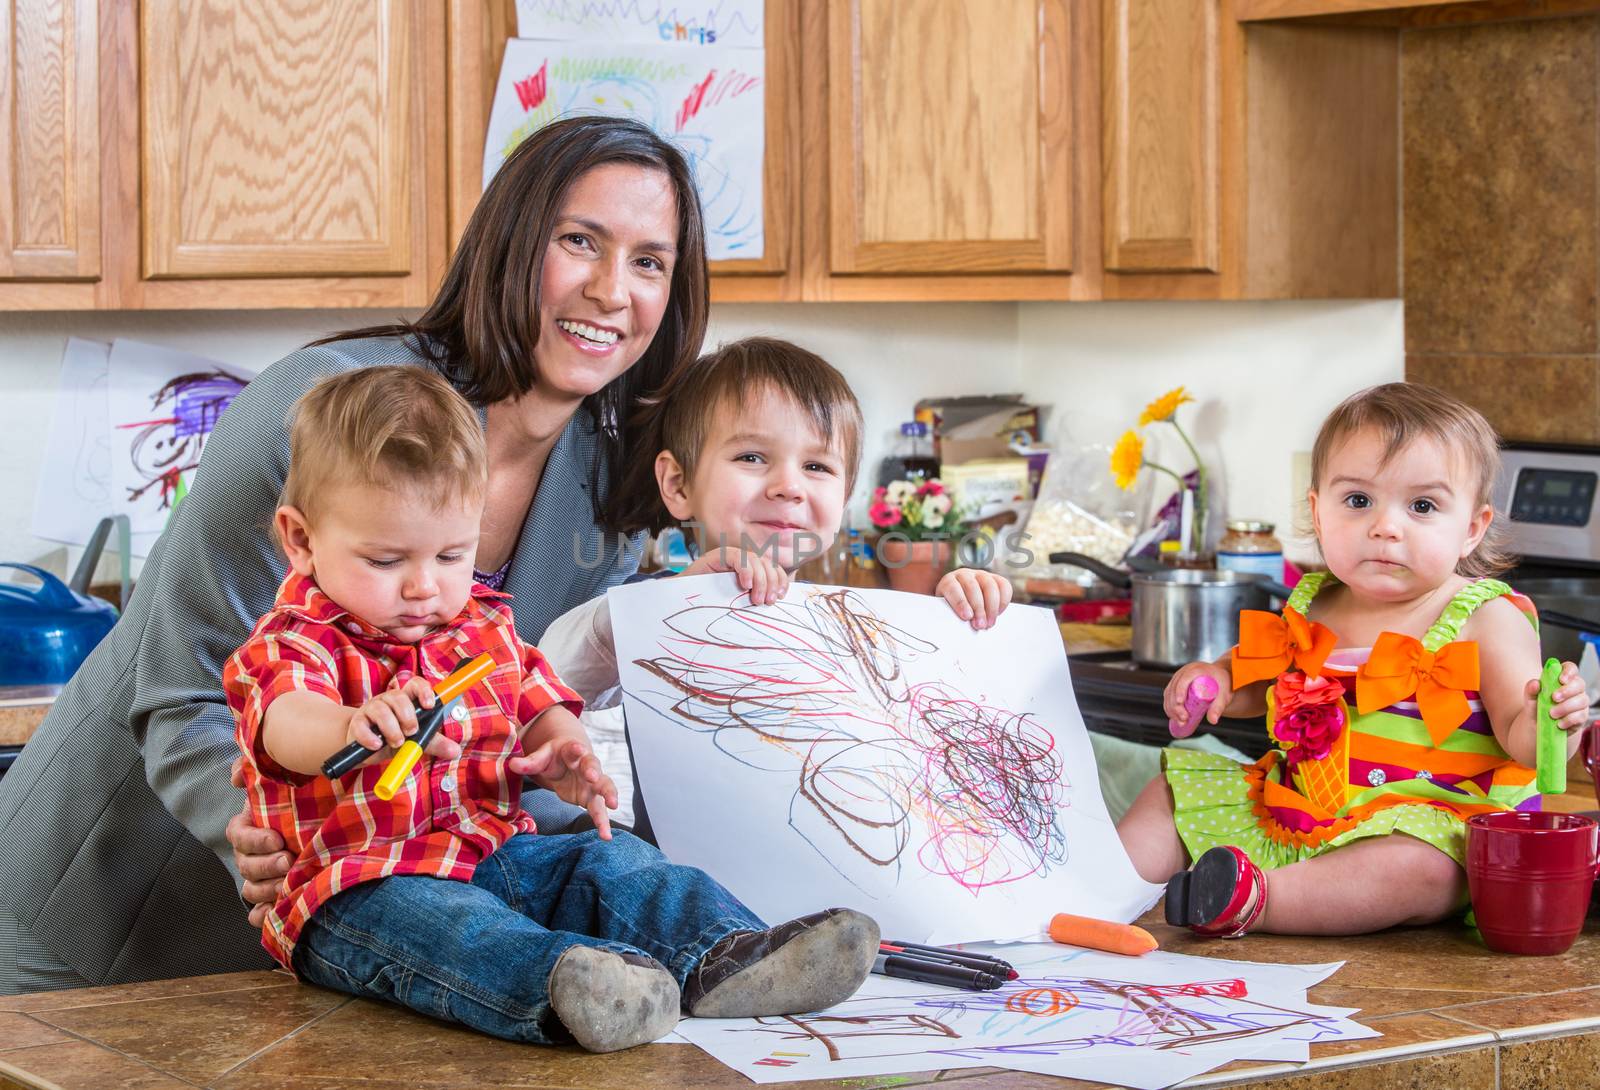 Mother poses with children in the kitchen